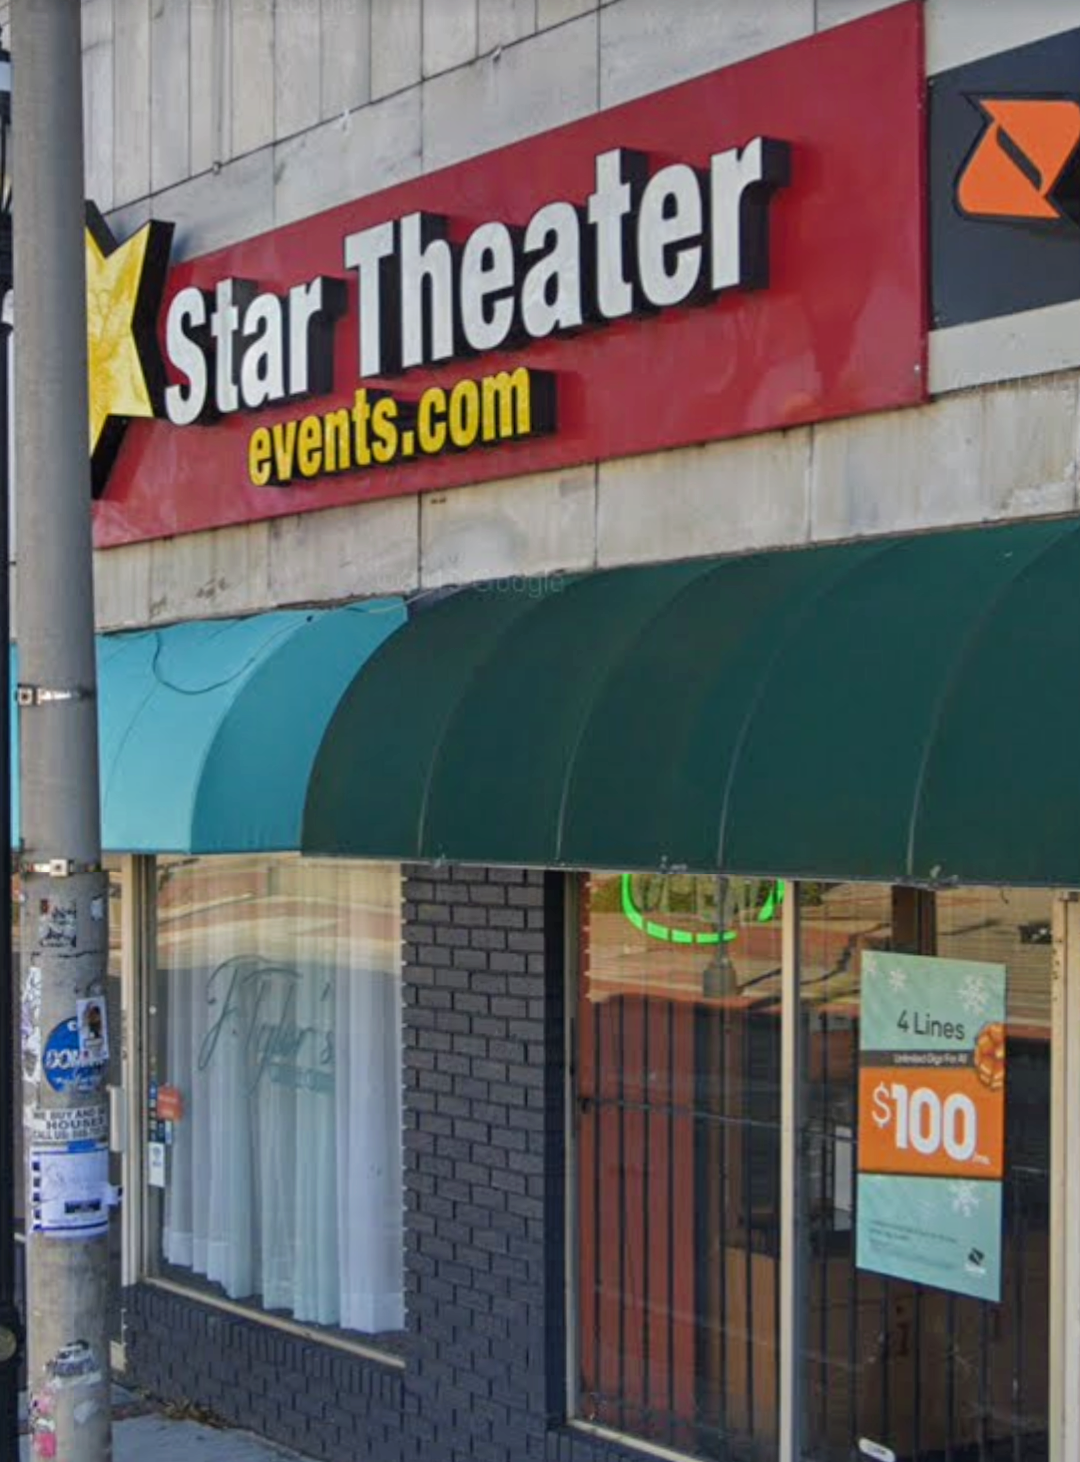 Star Theater Events